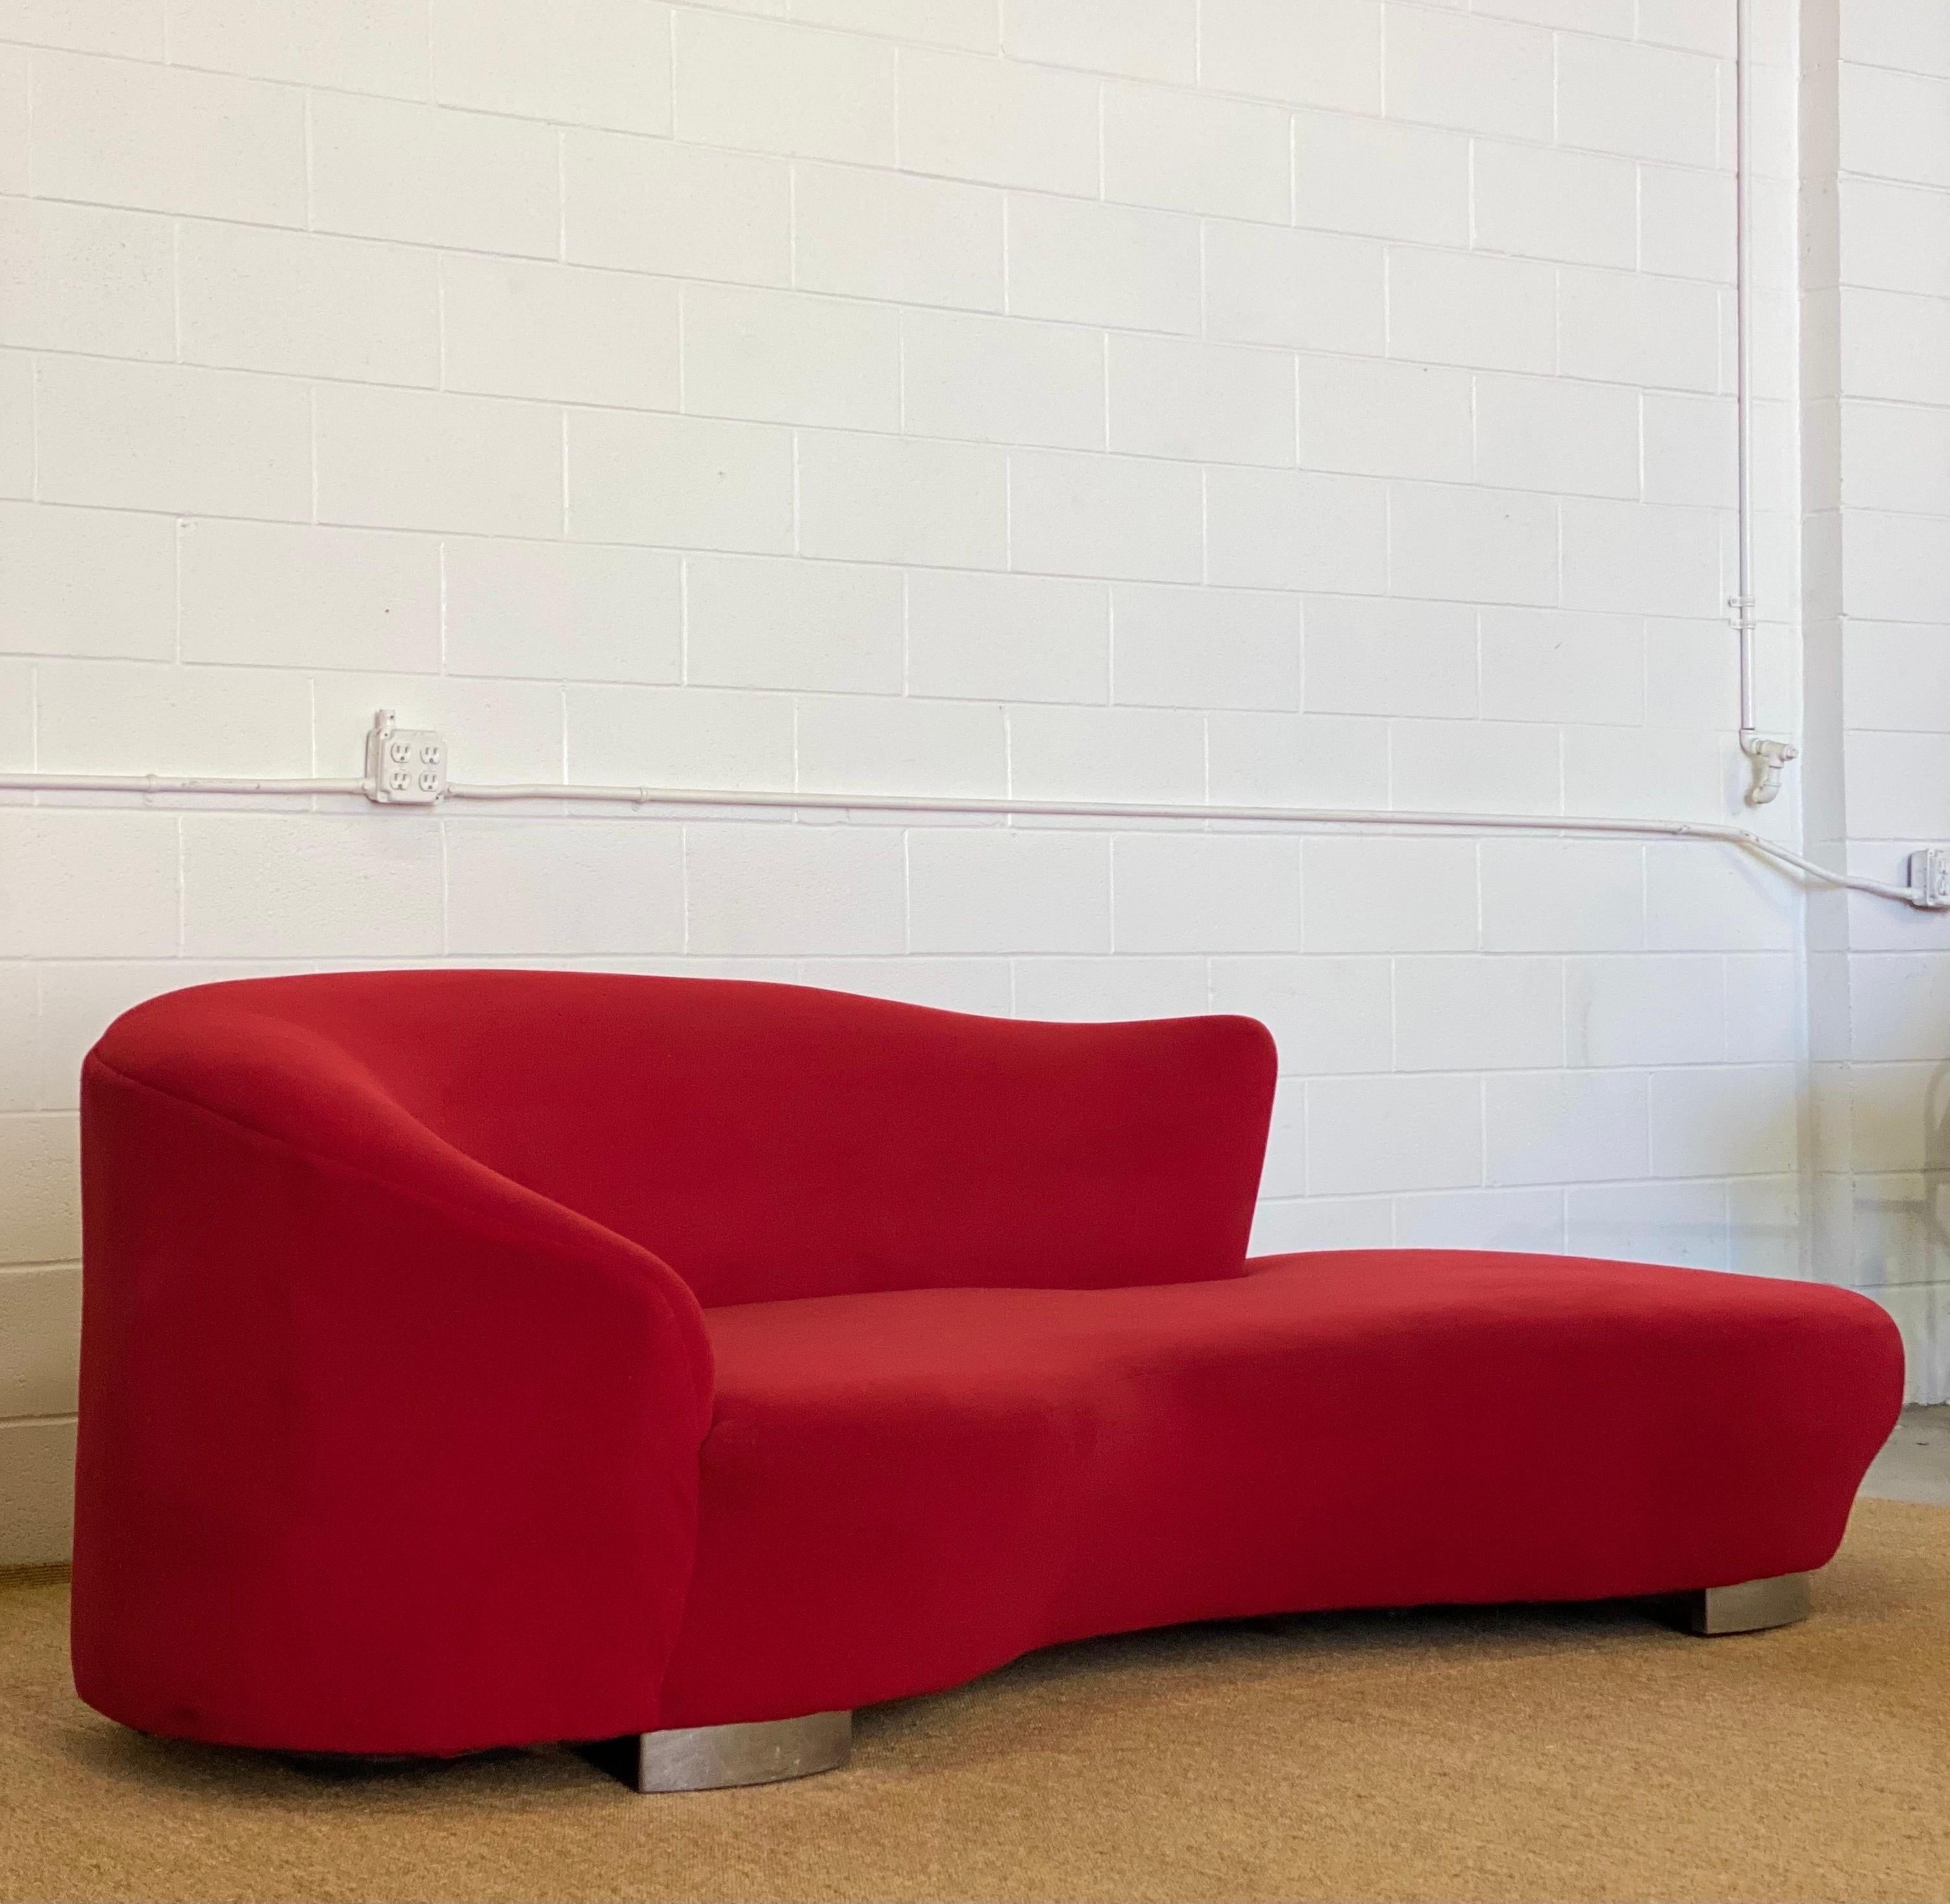 We are very pleased to offer a stunning cloud sofa, circa the 1980s. This biomorphic sofa sits on four chrome legs and features a red microsuede fabric. This piece is structurally sound, but fabric shows some blemishes and stains; thus, reupholstery